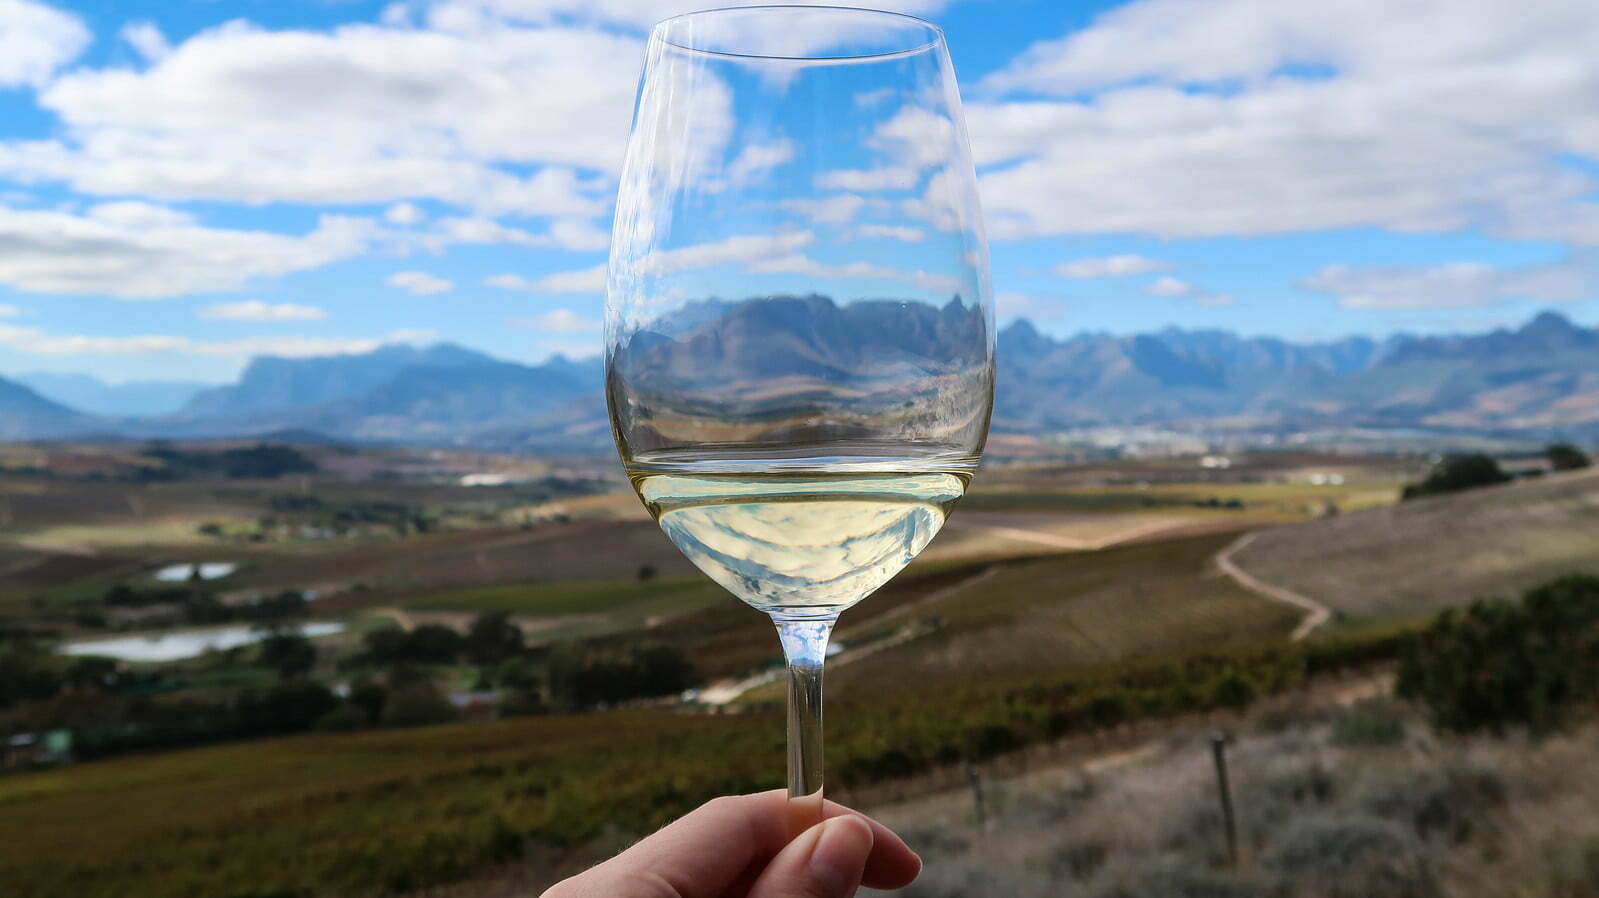 Wine tourism in South Africa in an Emerging Markets country